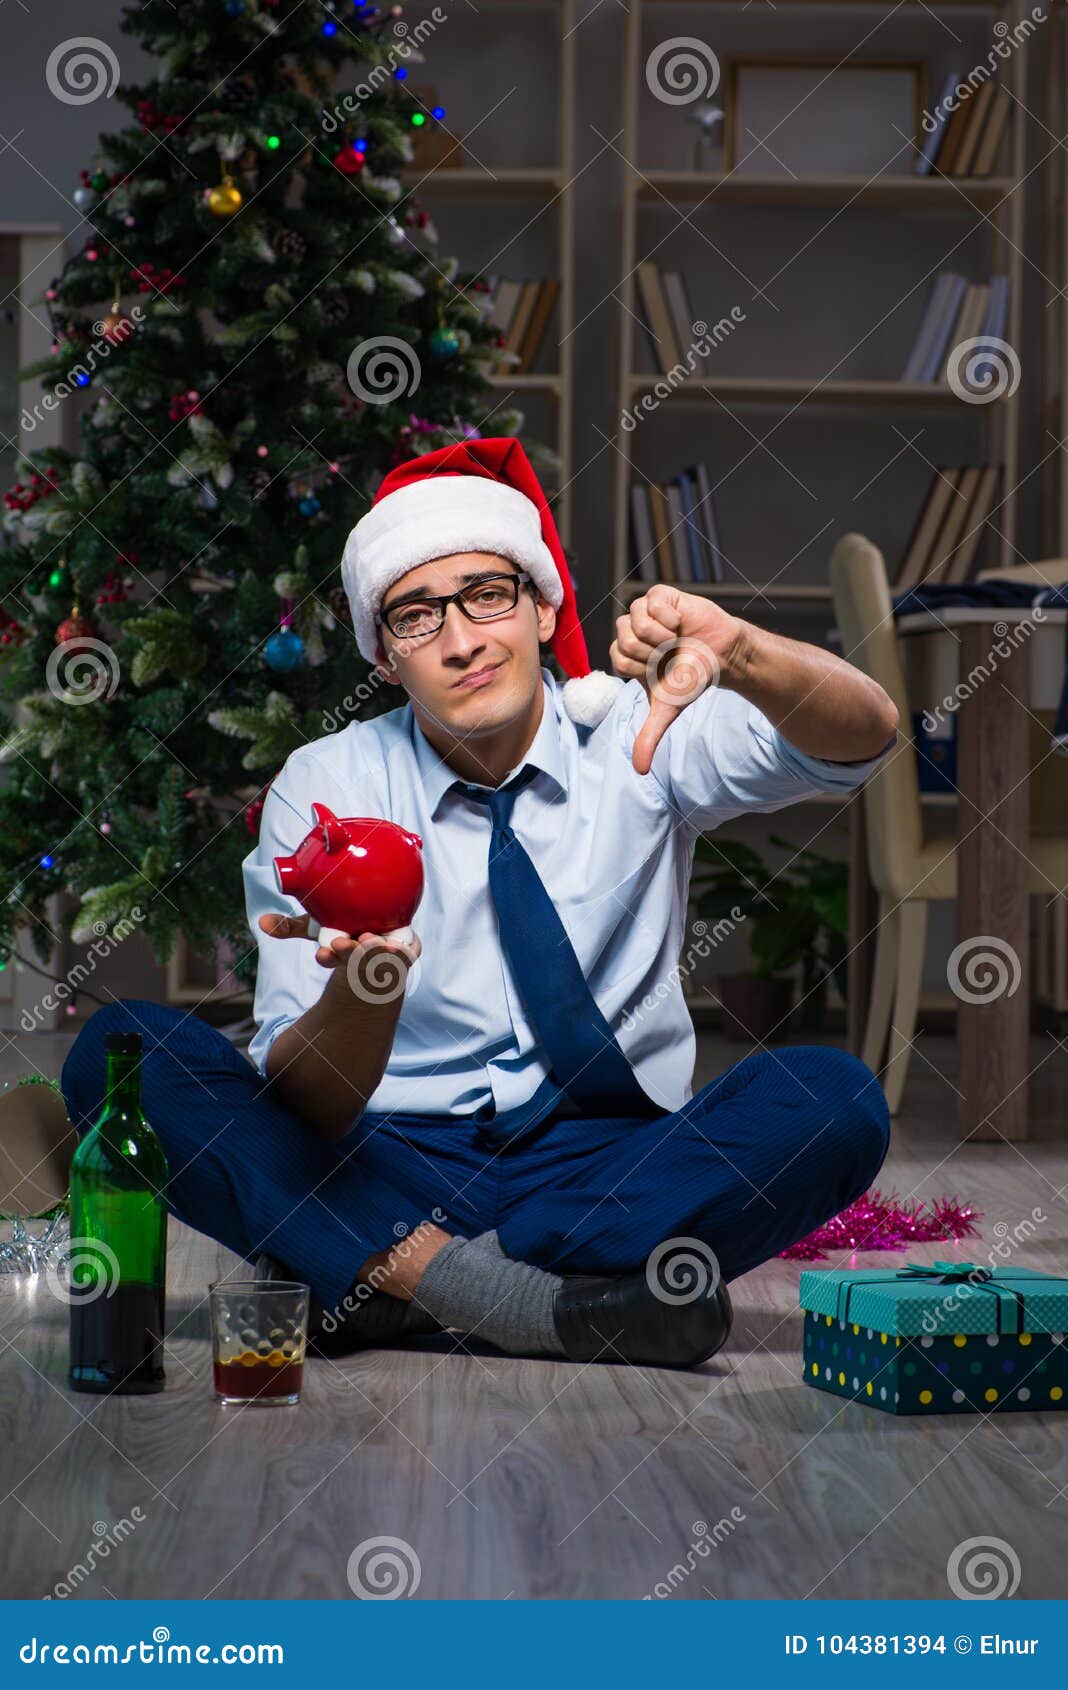 The Businessman Celebrating Christmas At Home Alone Stock Photo - Image